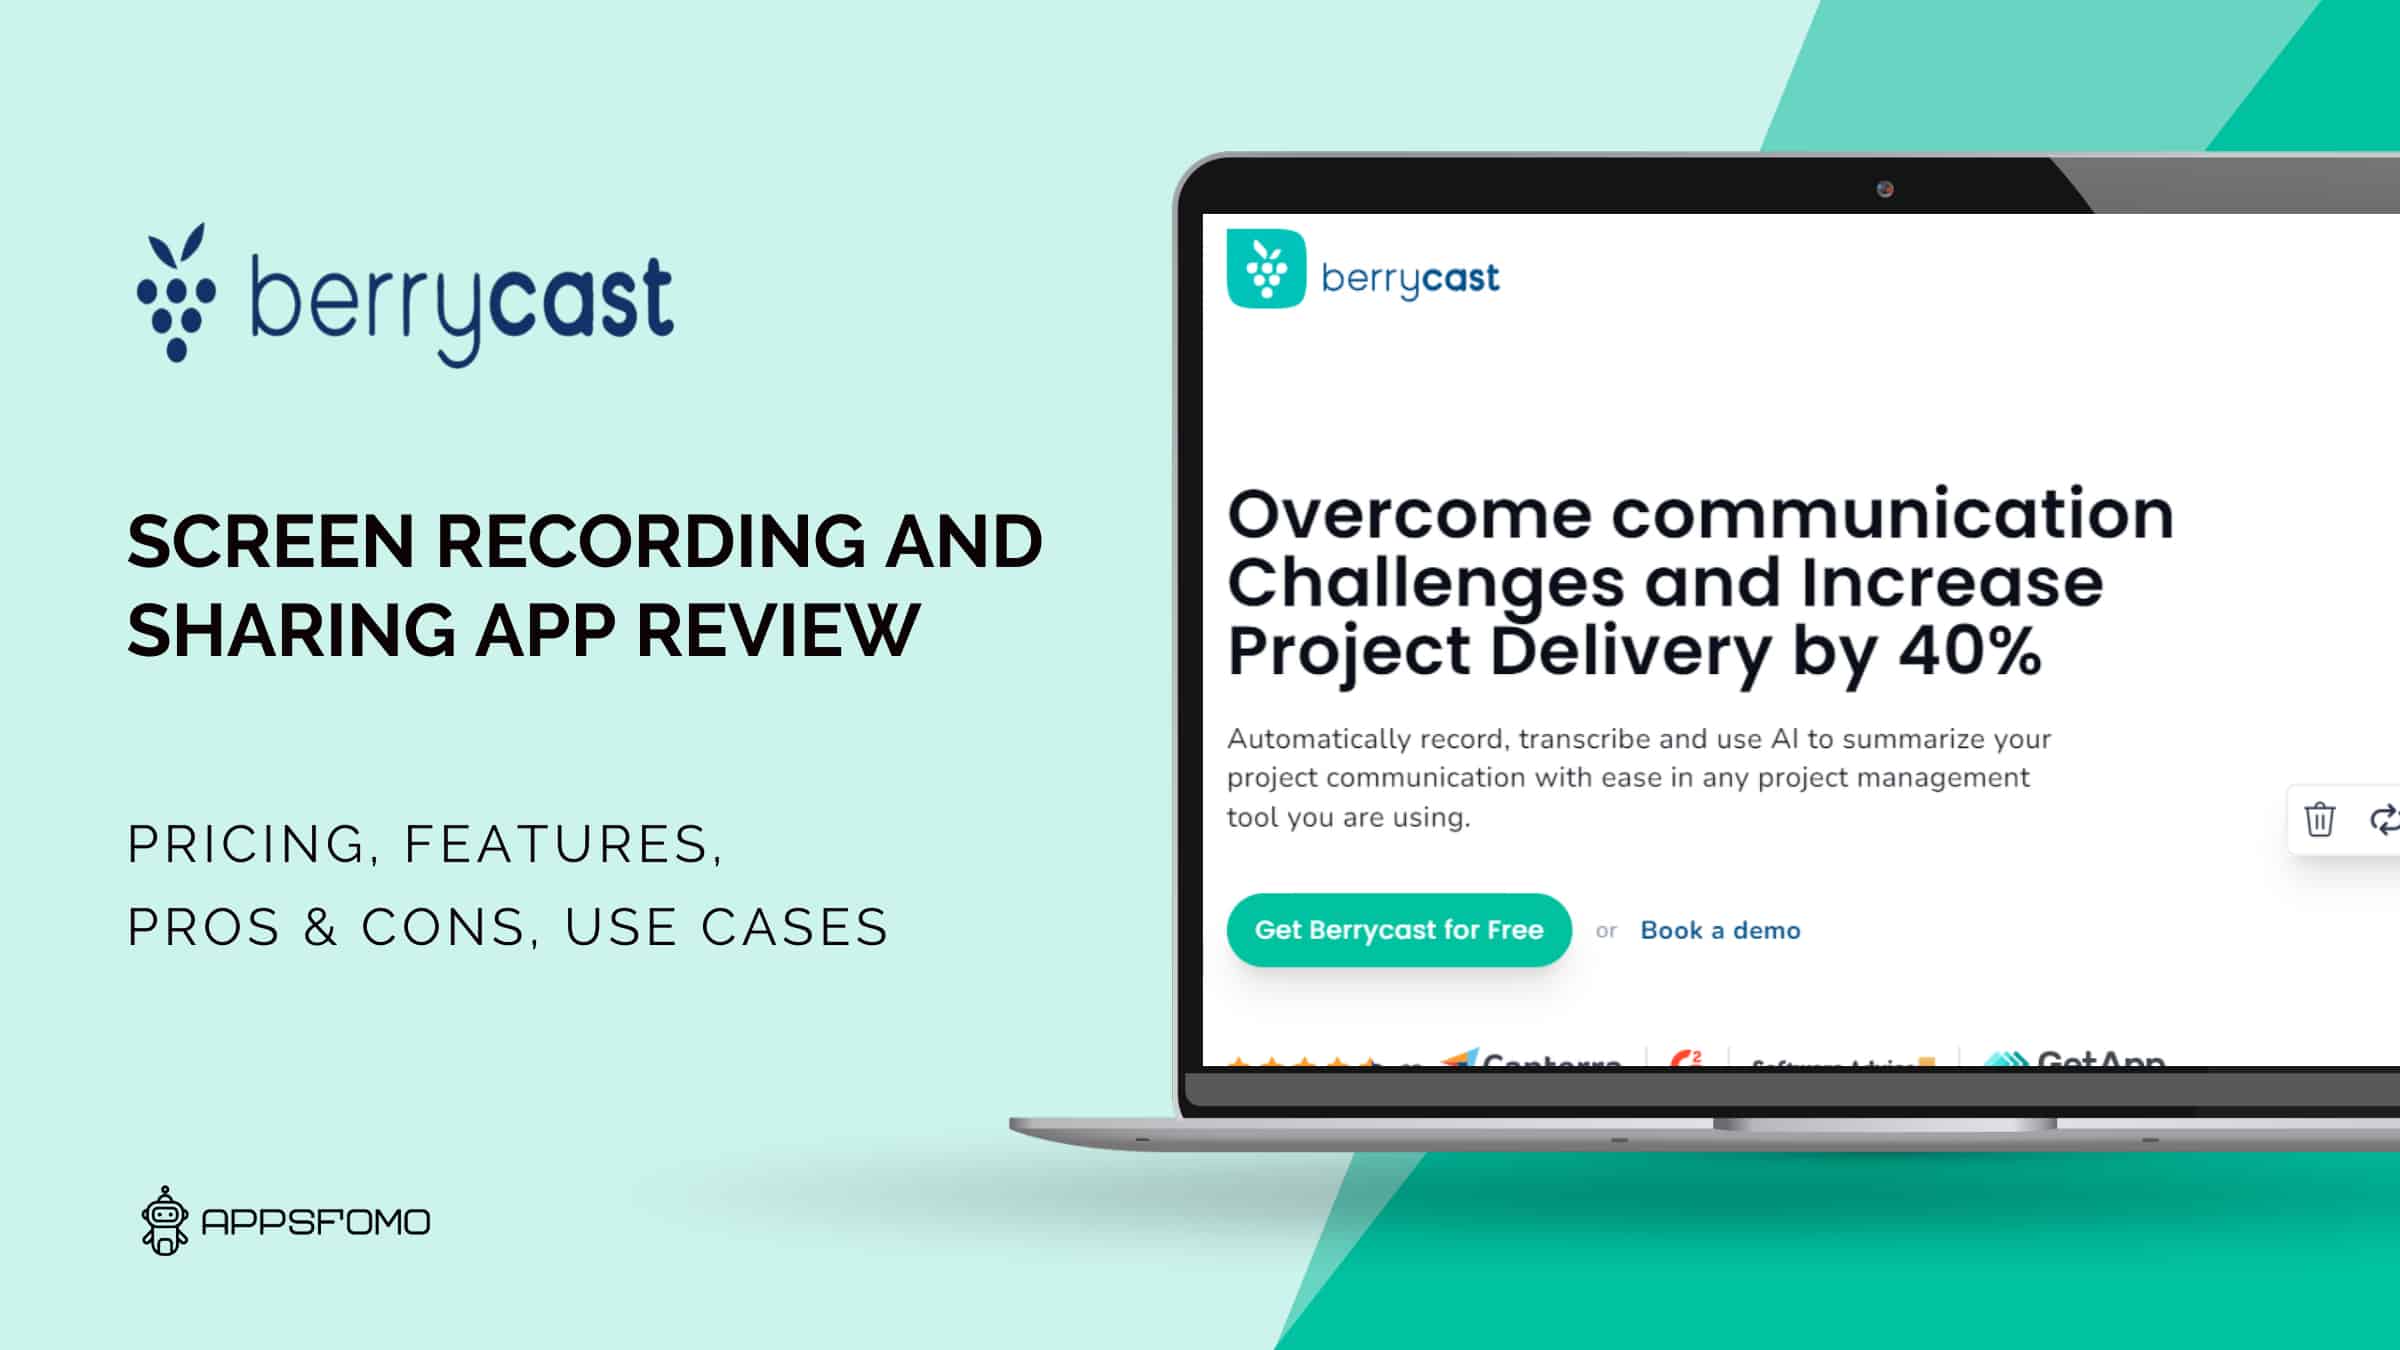 Berrycast: Screen Recording and Sharing App for Business Communication